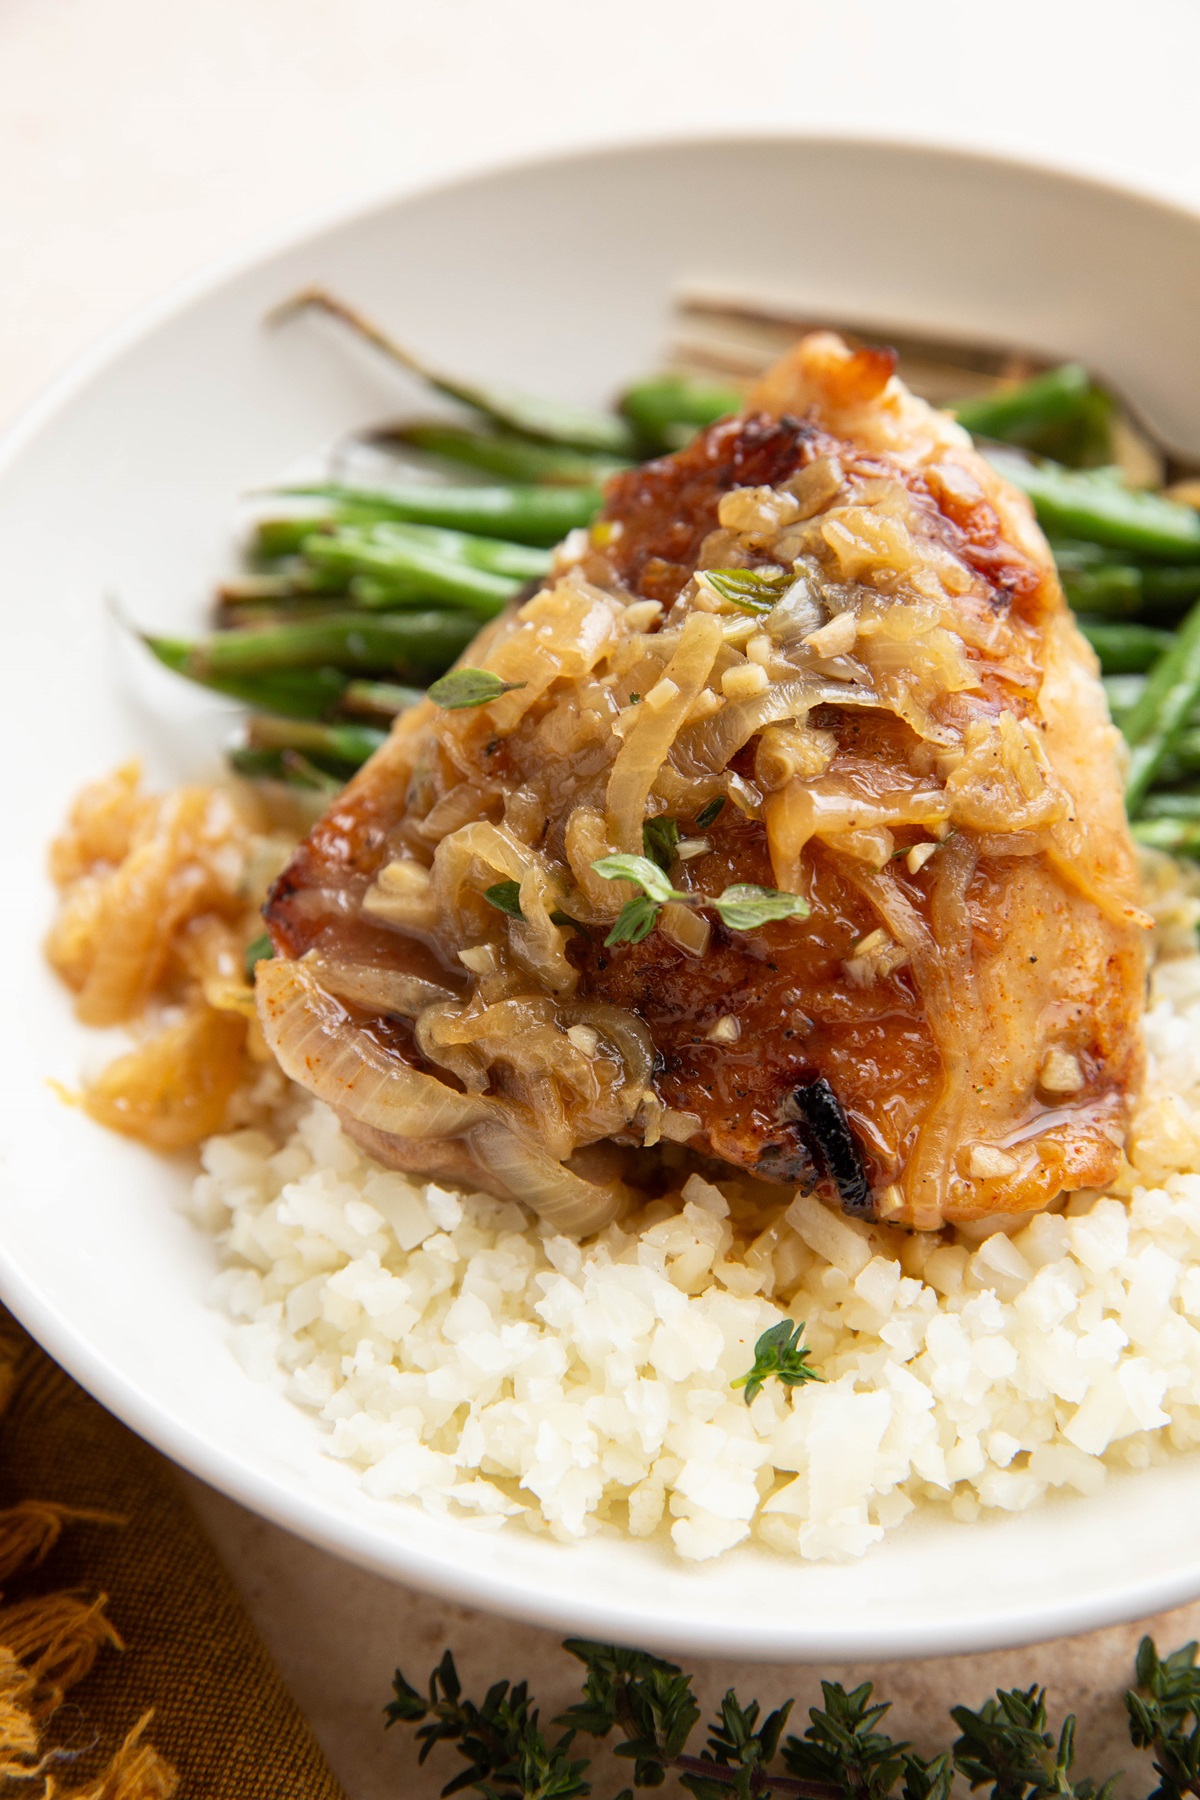 Chicken thigh with caramelized onions on top with cauliflower rice and green beans in a bowl, ready to eat.